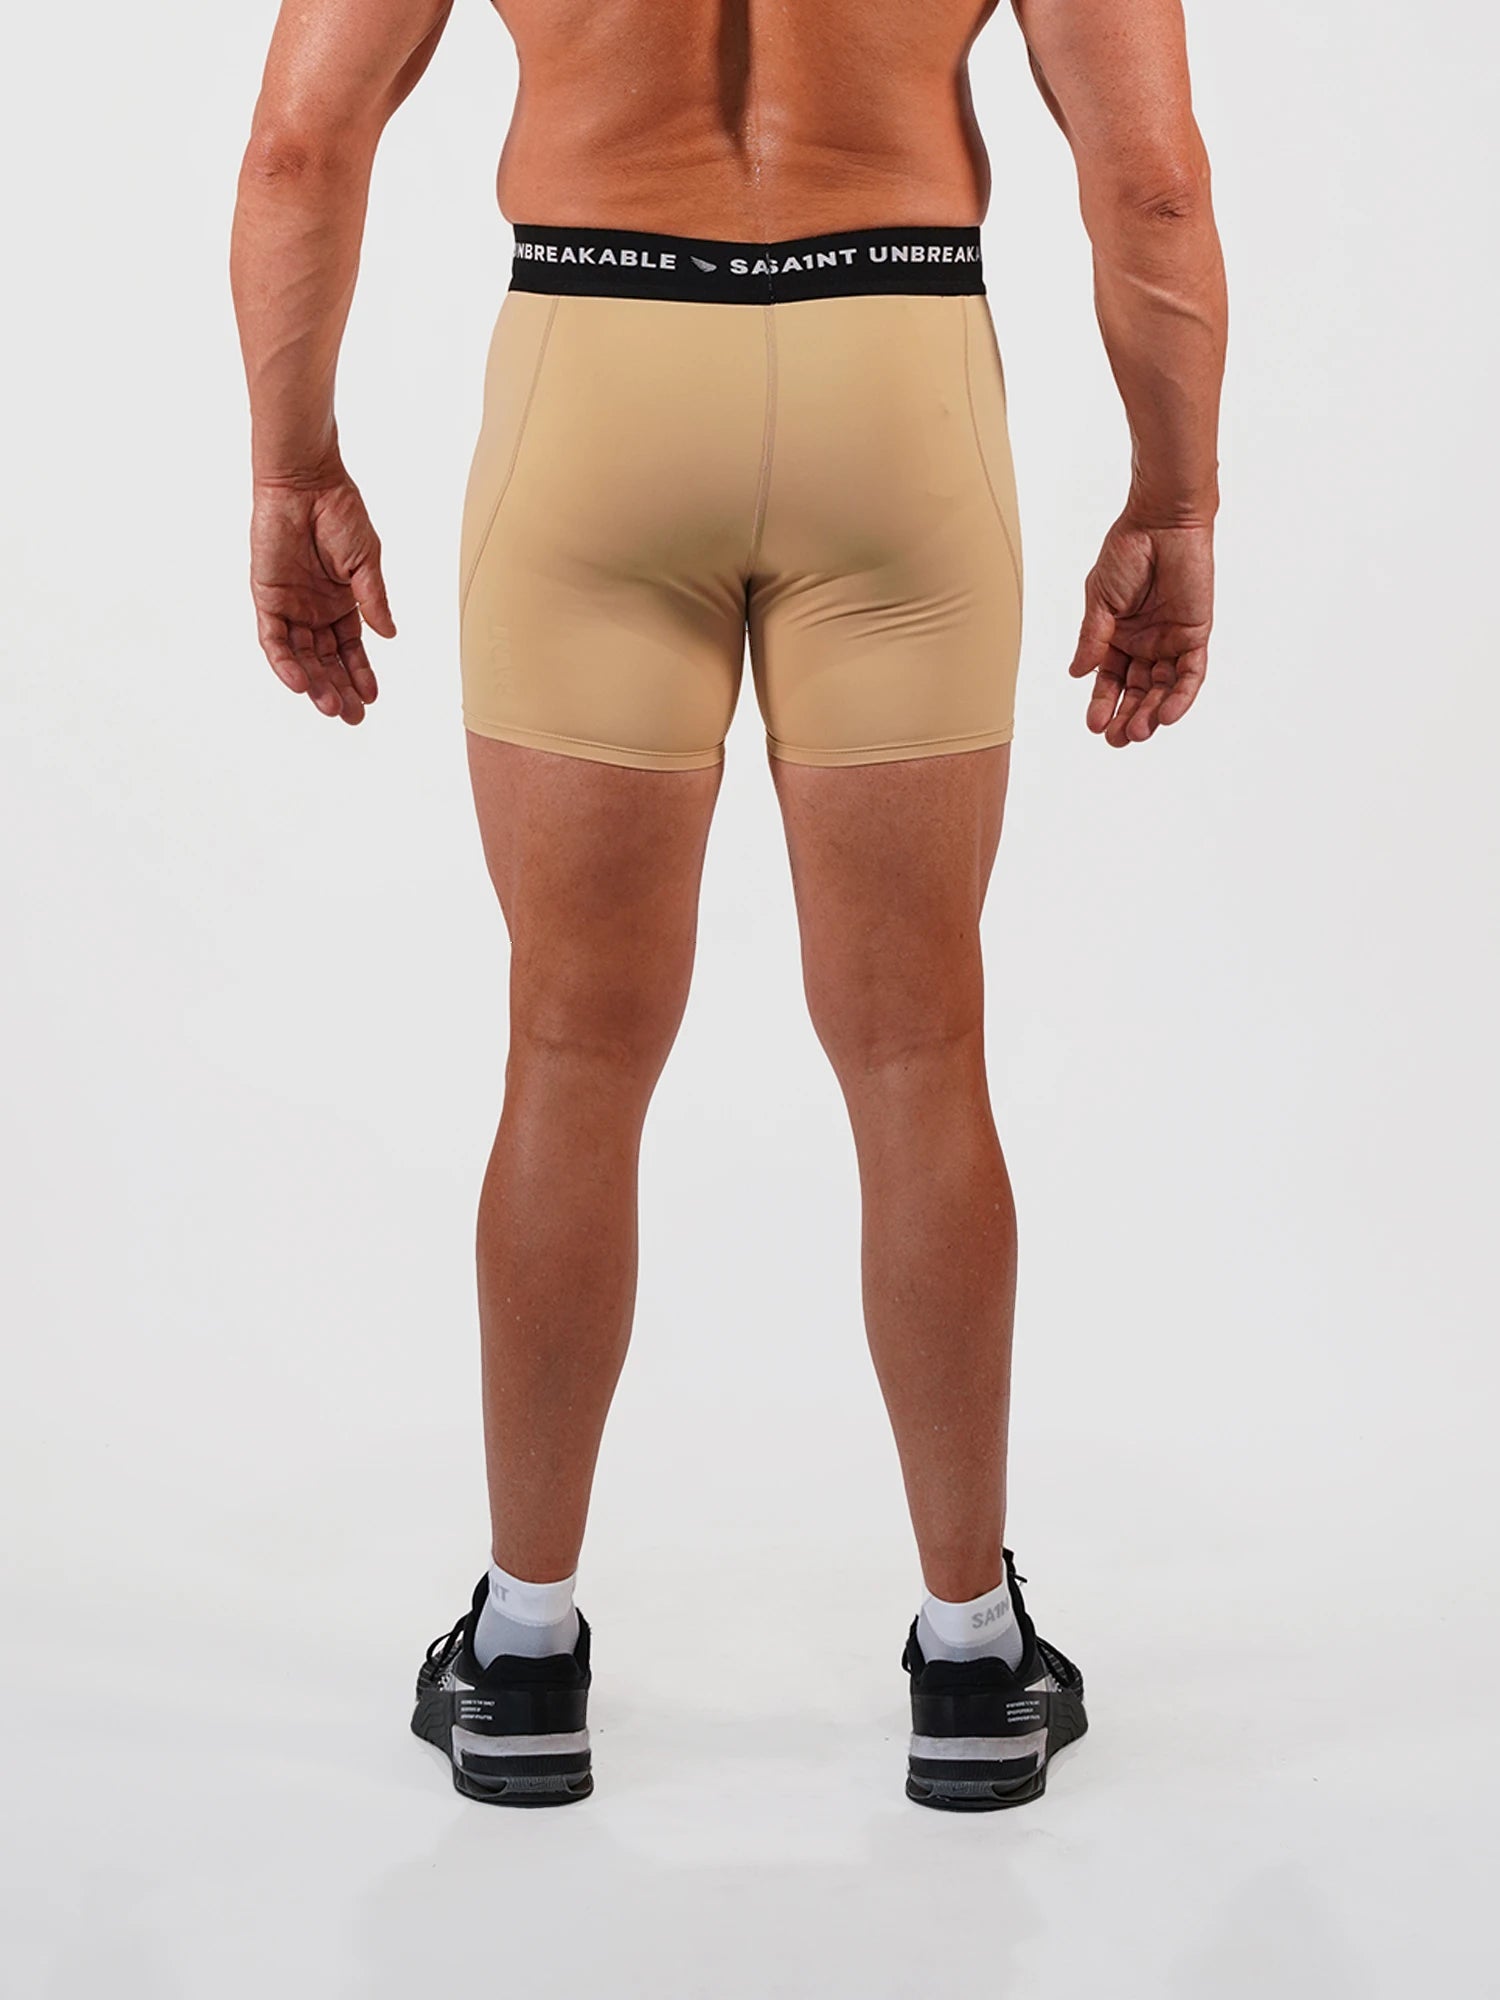 Mens Compression Game-Day 1/2 Shorts - Beige